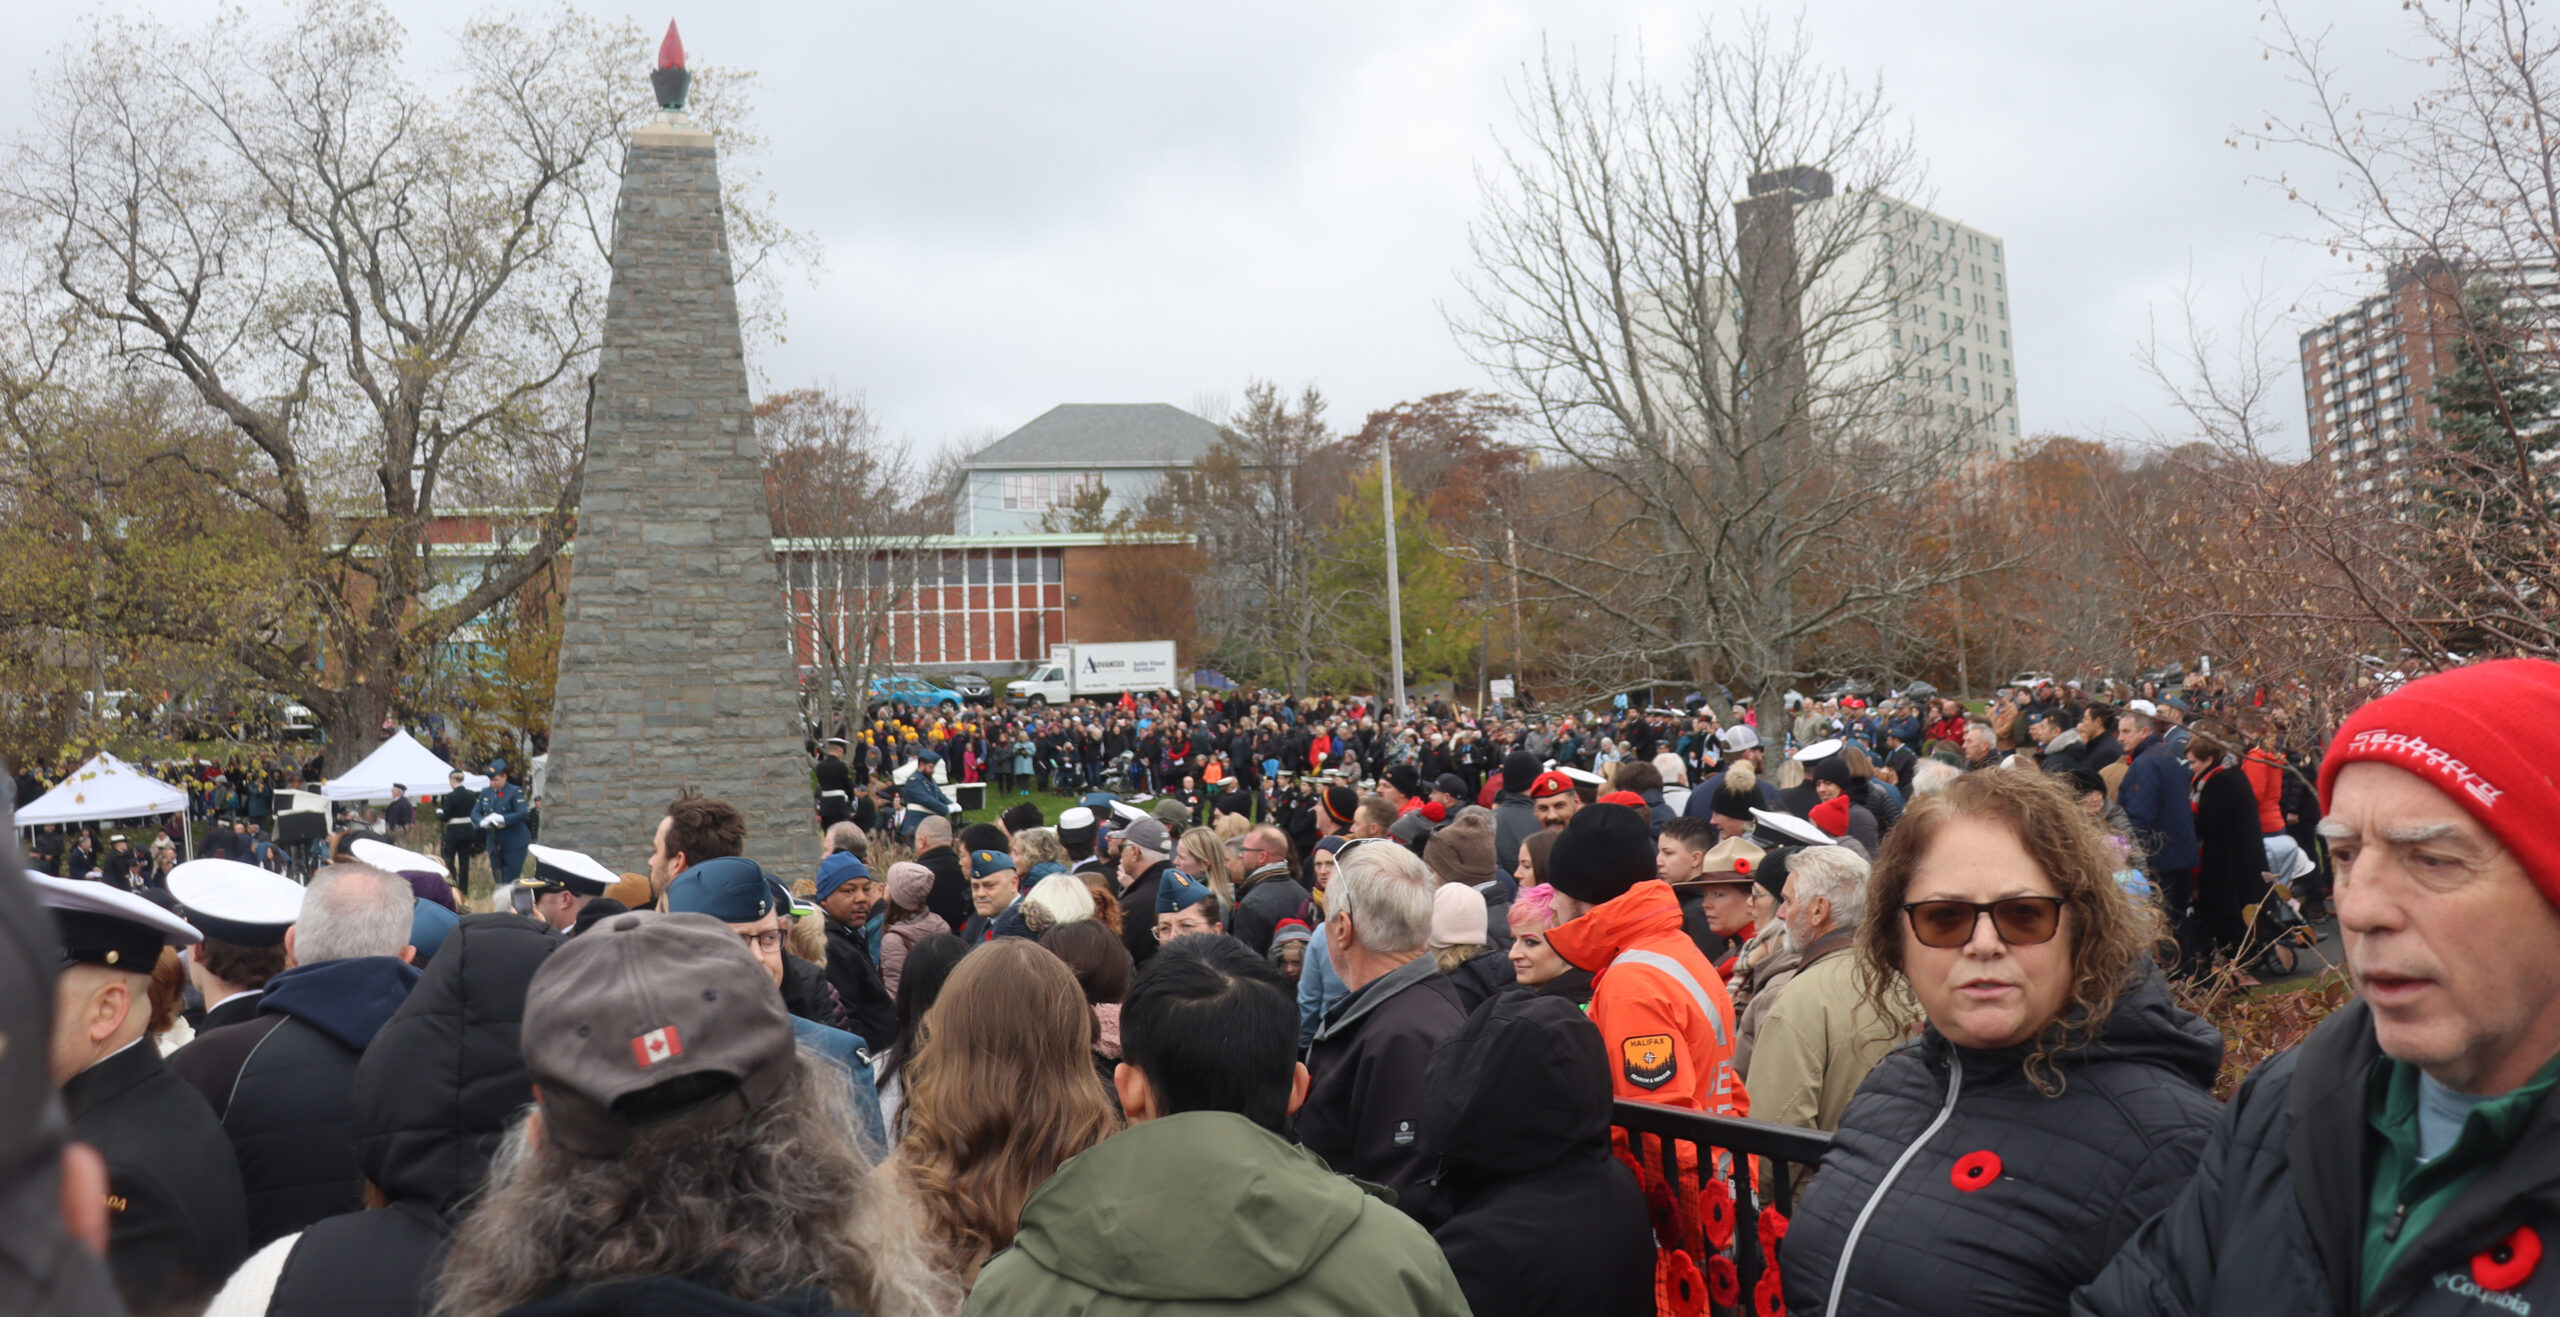 A large crowd awaits the Remembrance Day Ceremony to start in Dartmouth, NS.